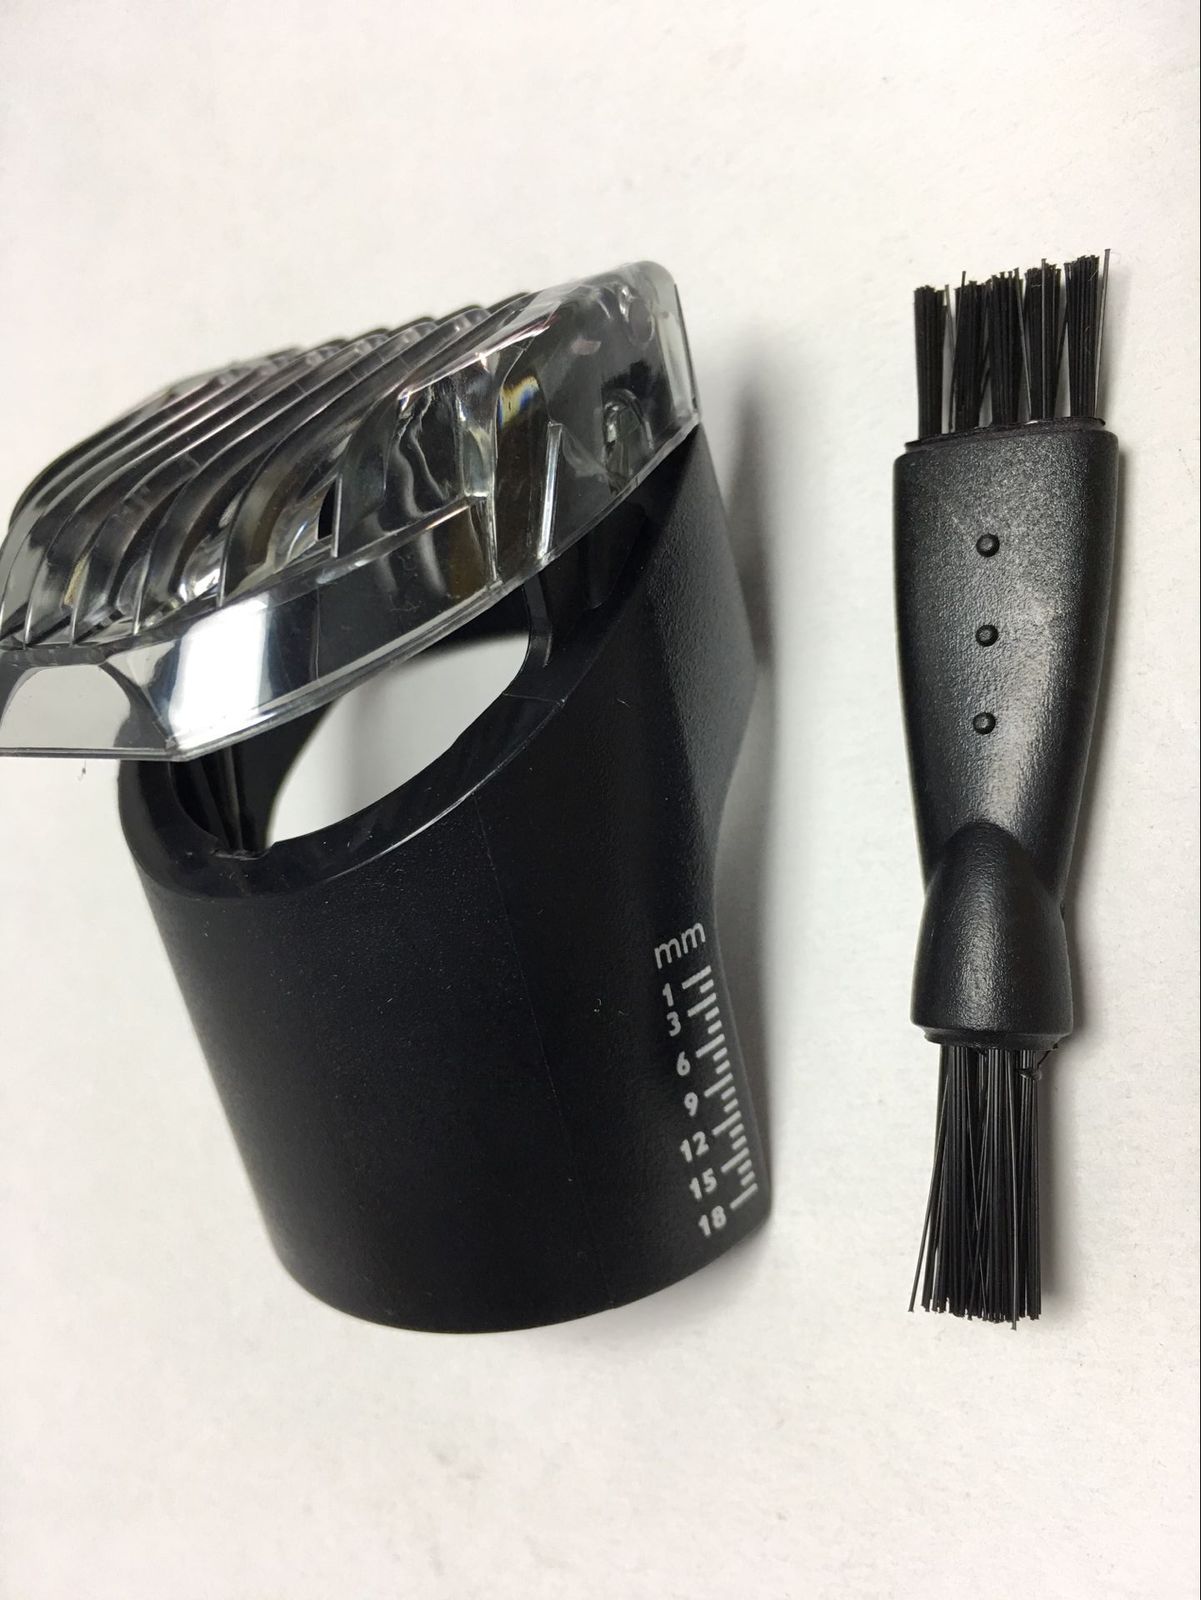 philips hair clipper value for mens